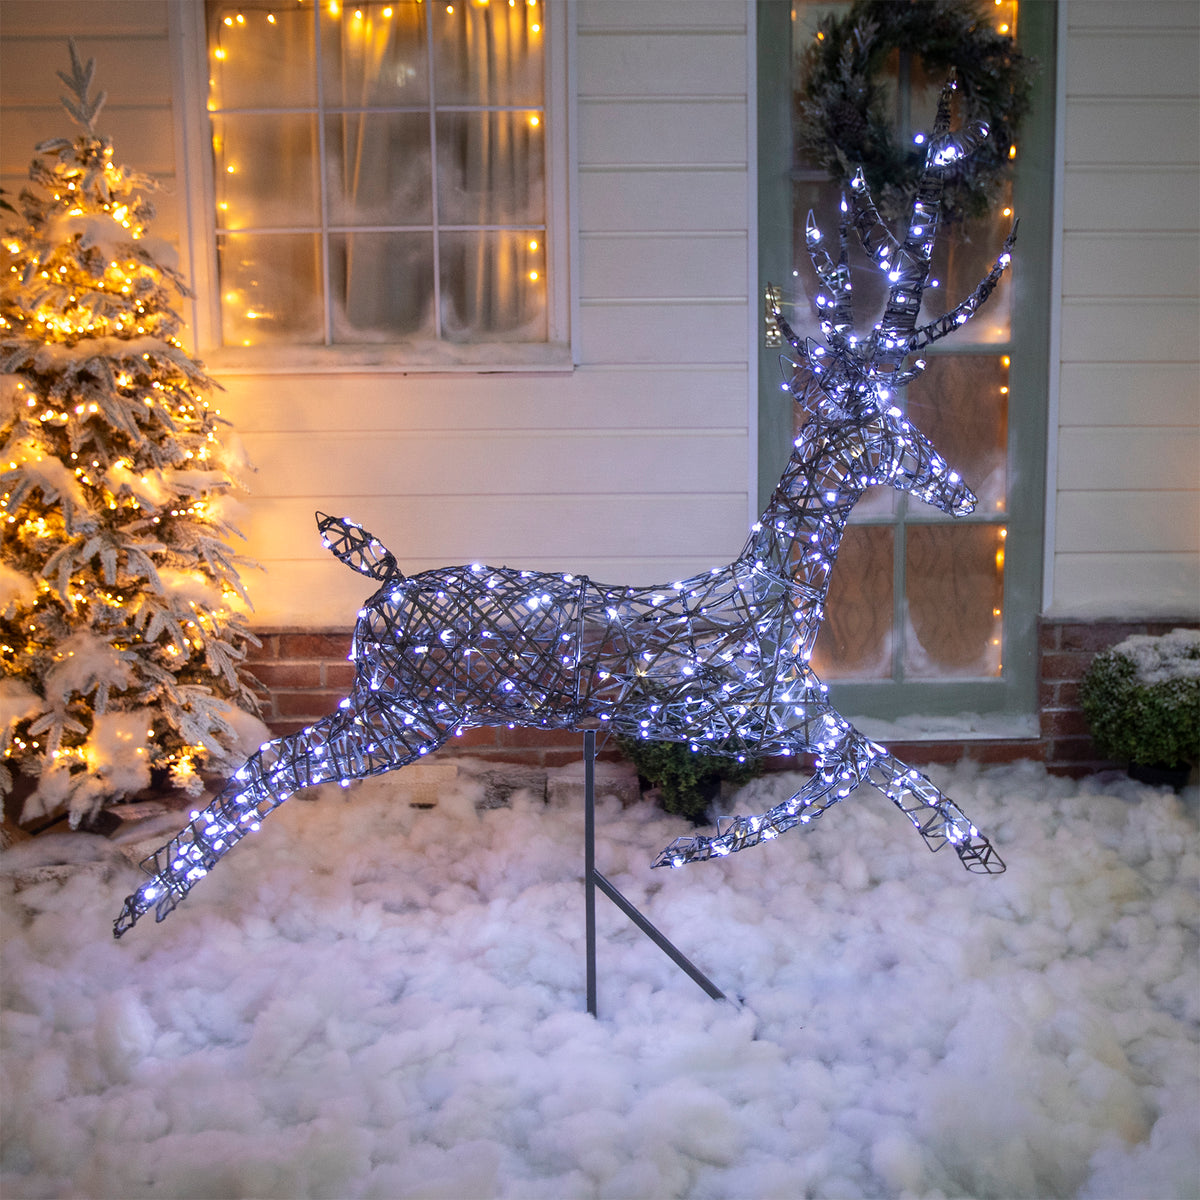 Christmas Reindeer Lights - 1.5M Grey Weave Light Up Flying Stag with 330 White LEDs